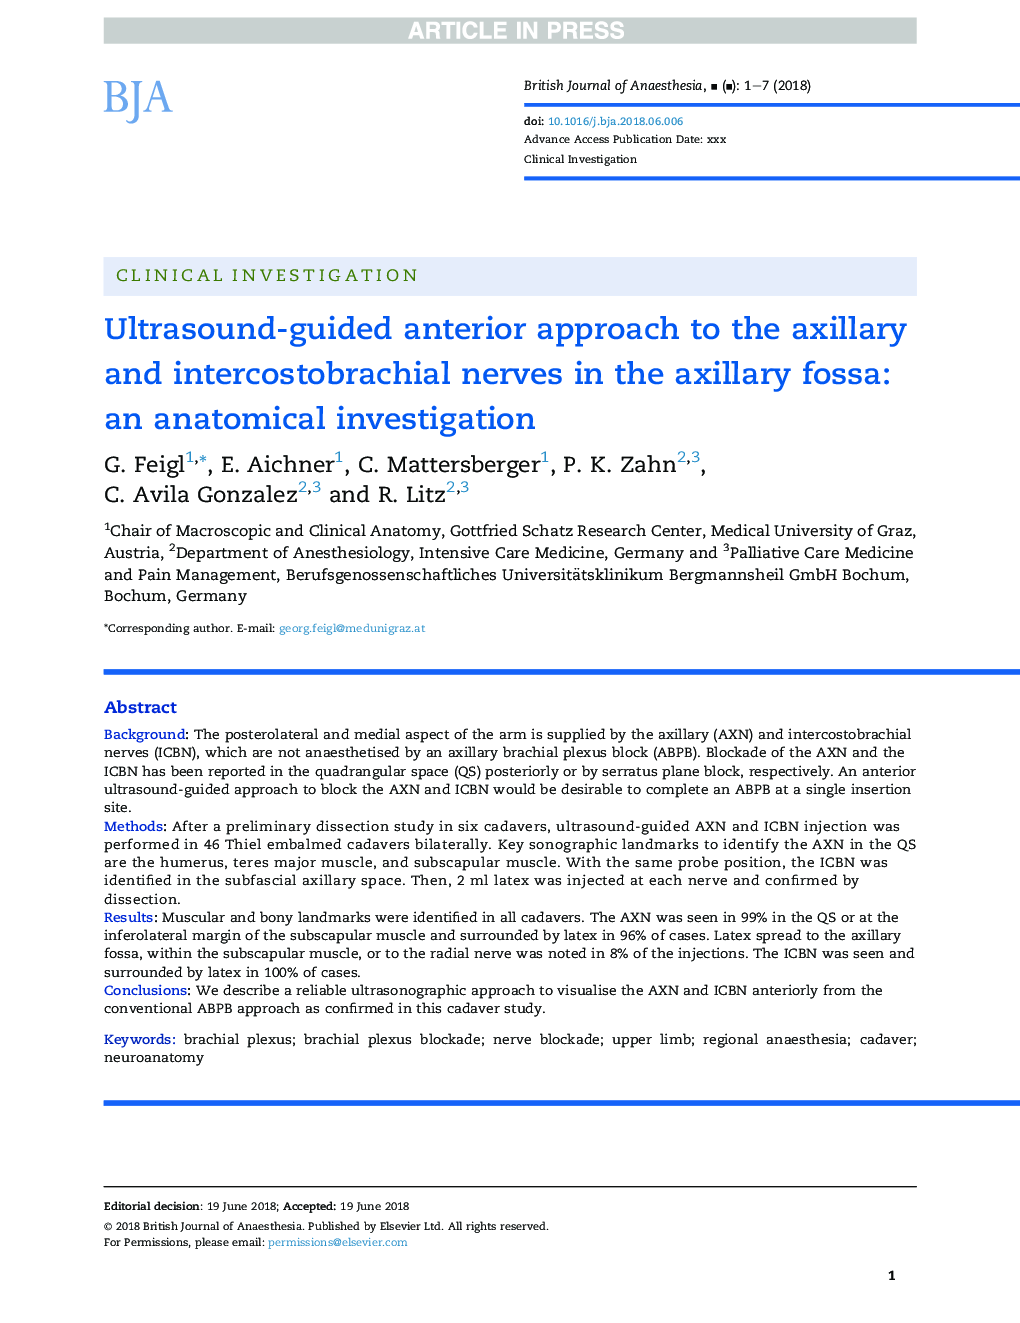 Ultrasound-guided anterior approach to the axillary and intercostobrachial nerves in the axillary fossa: an anatomical investigation